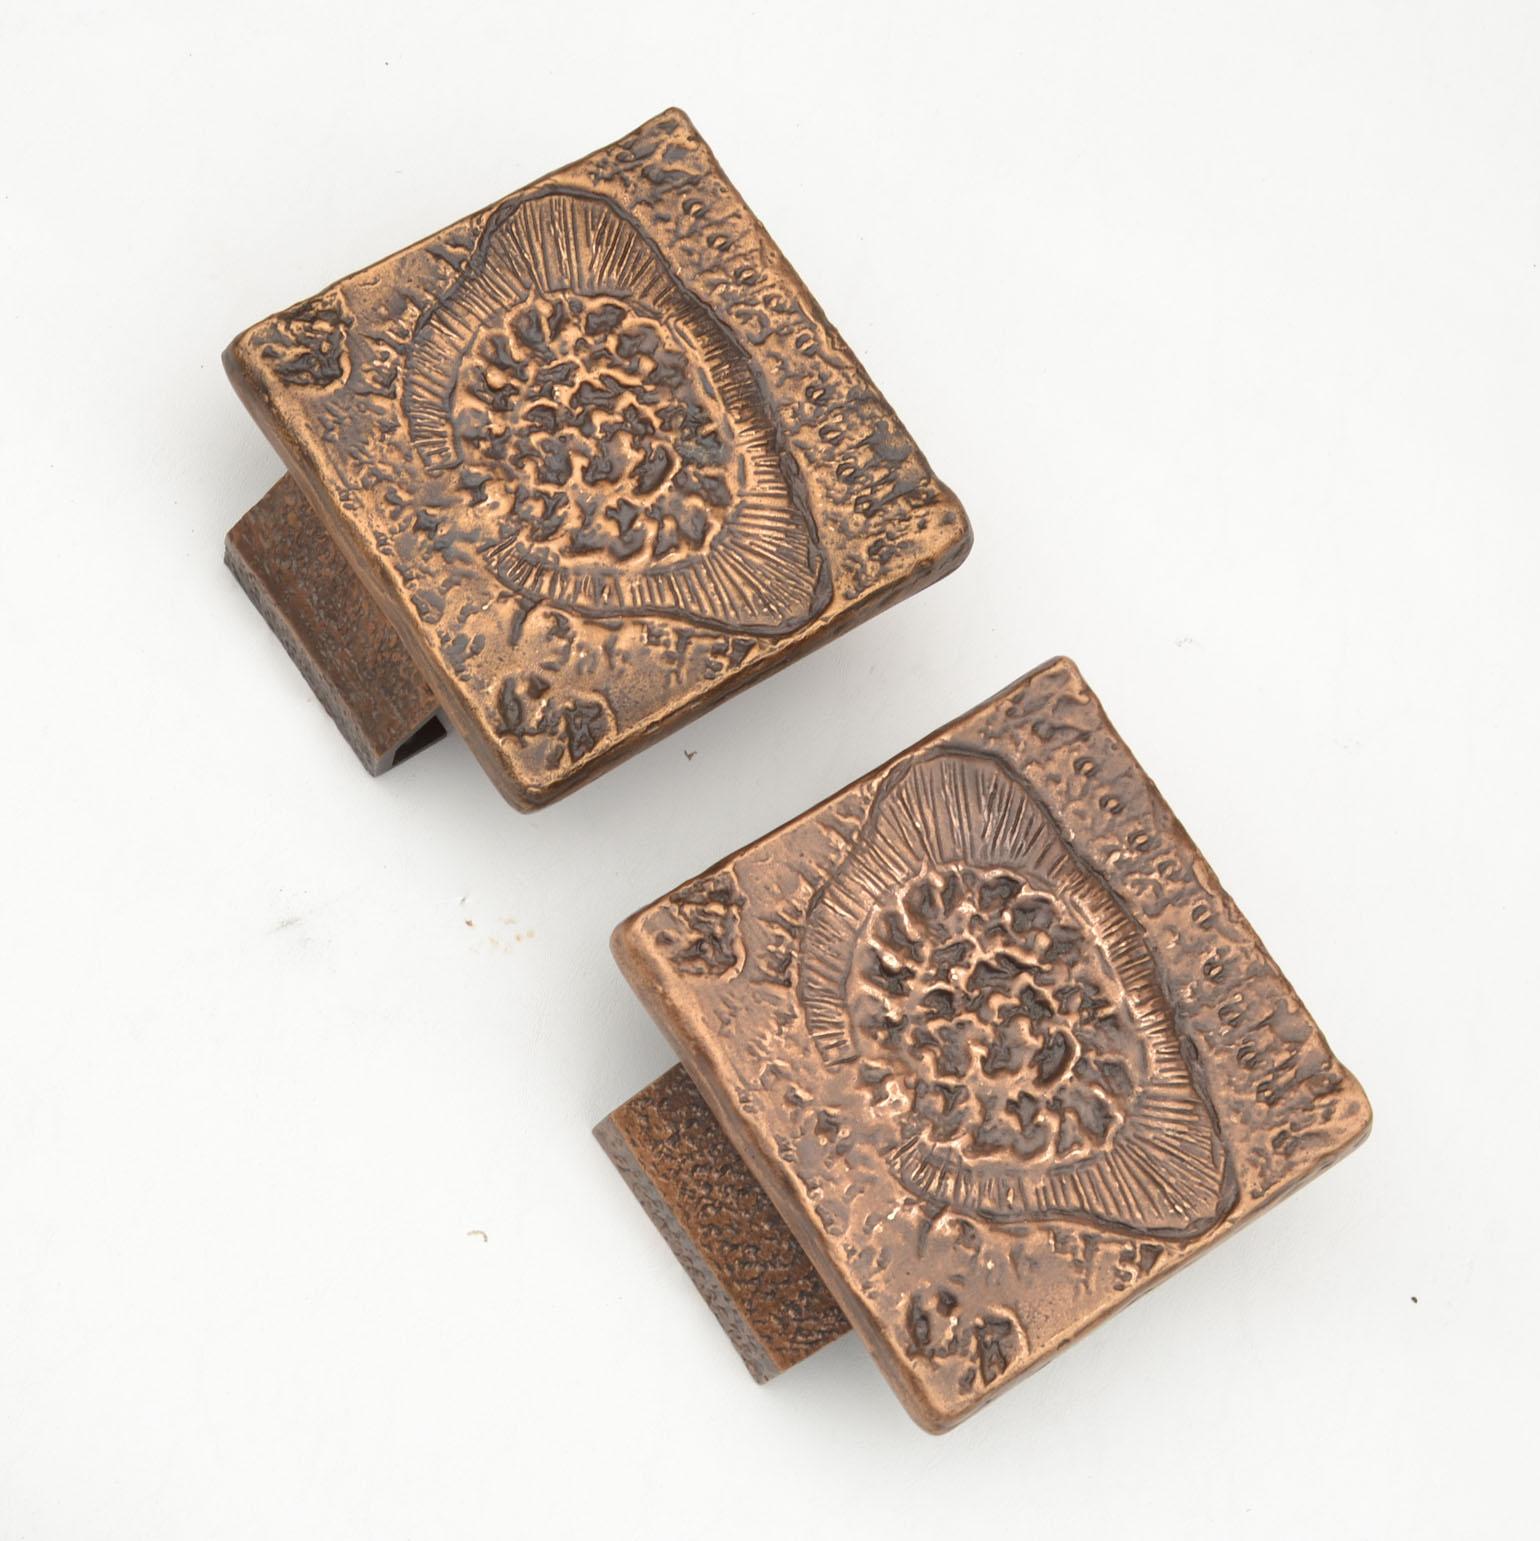 The art relief on the cast bronze door handles are like the surface crust of the moon. It is as if asteroids and meteorites collide with the celestial body, leaving its imprint on the surface.

These identical handles can be applied inside or